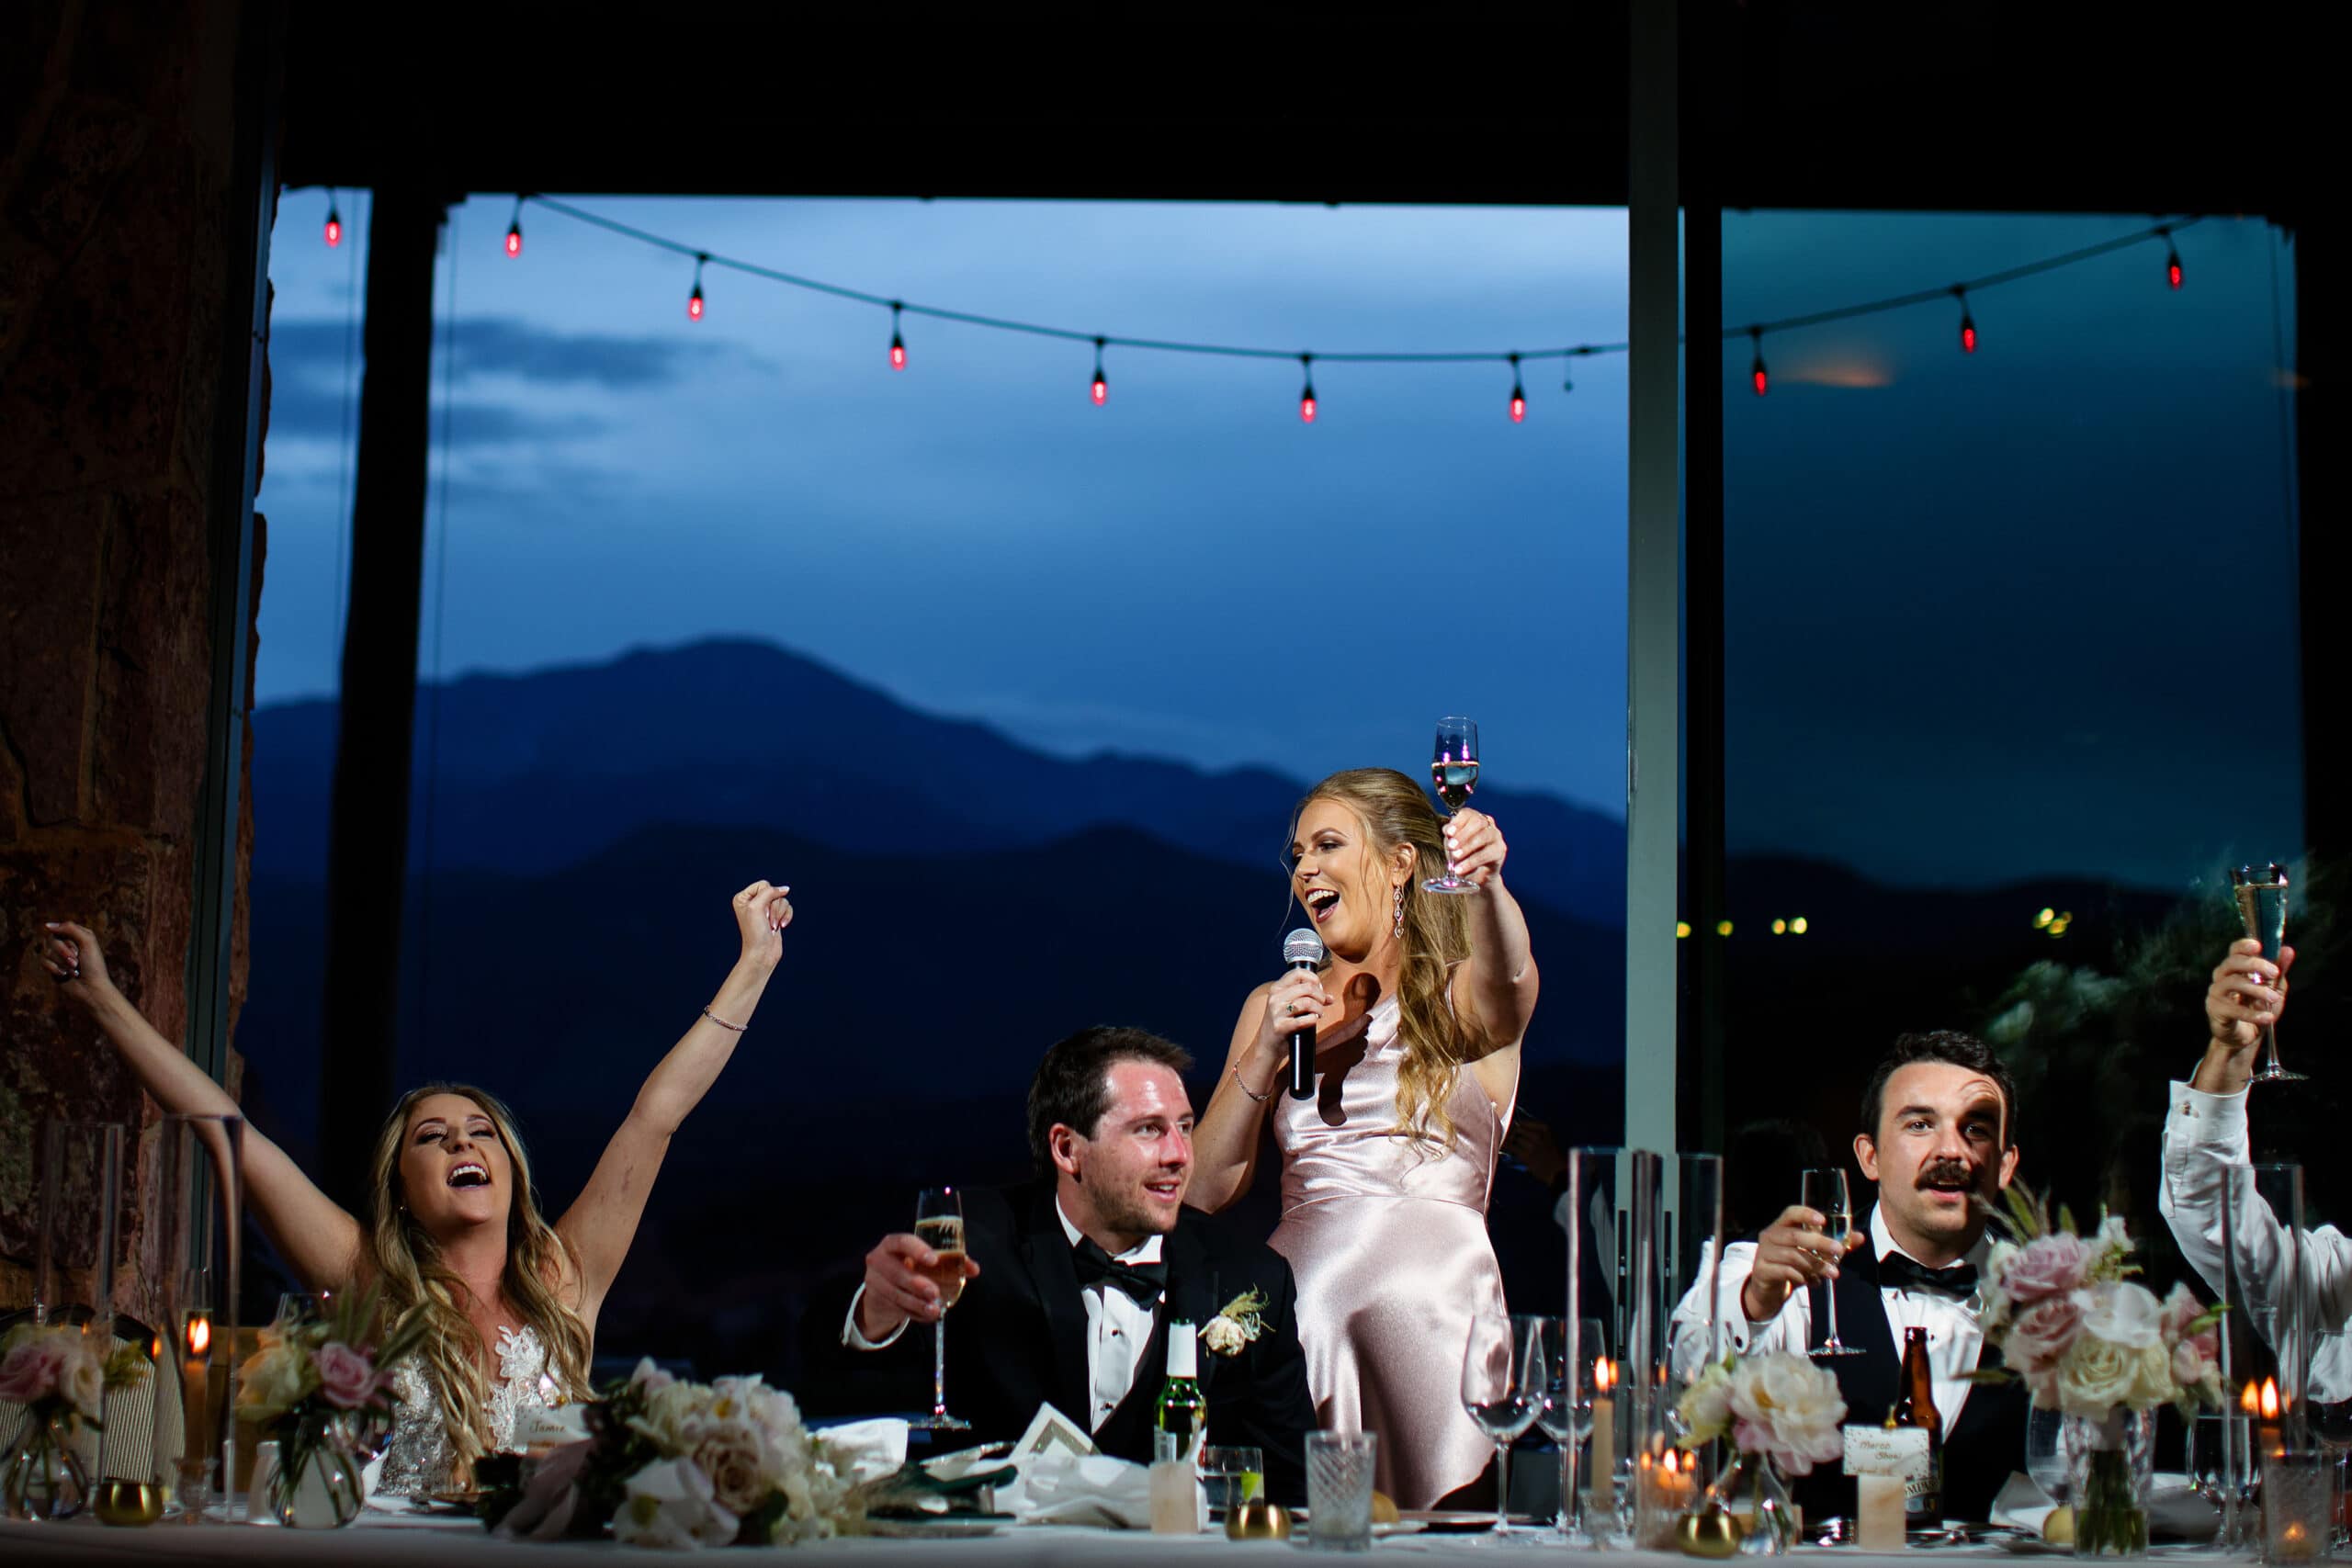 The maid of honor gives a toast as the bride reacts during the wedding reception at Garden of the Gods Resort